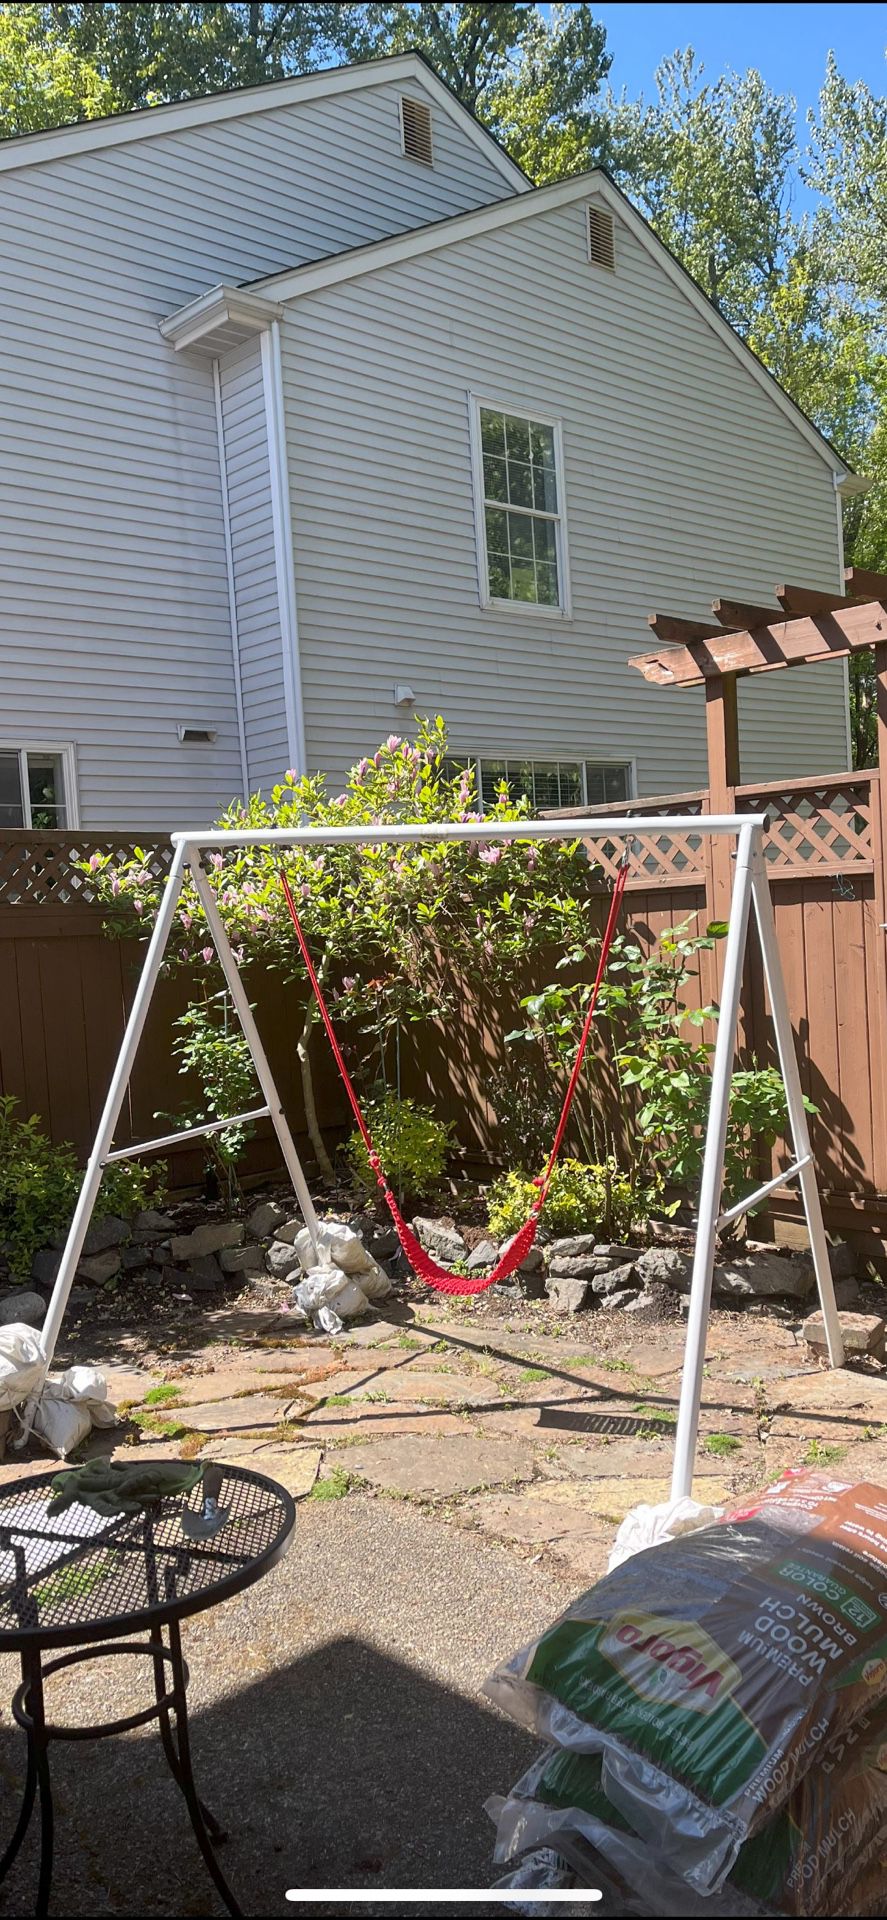 Swing Frame and swing set